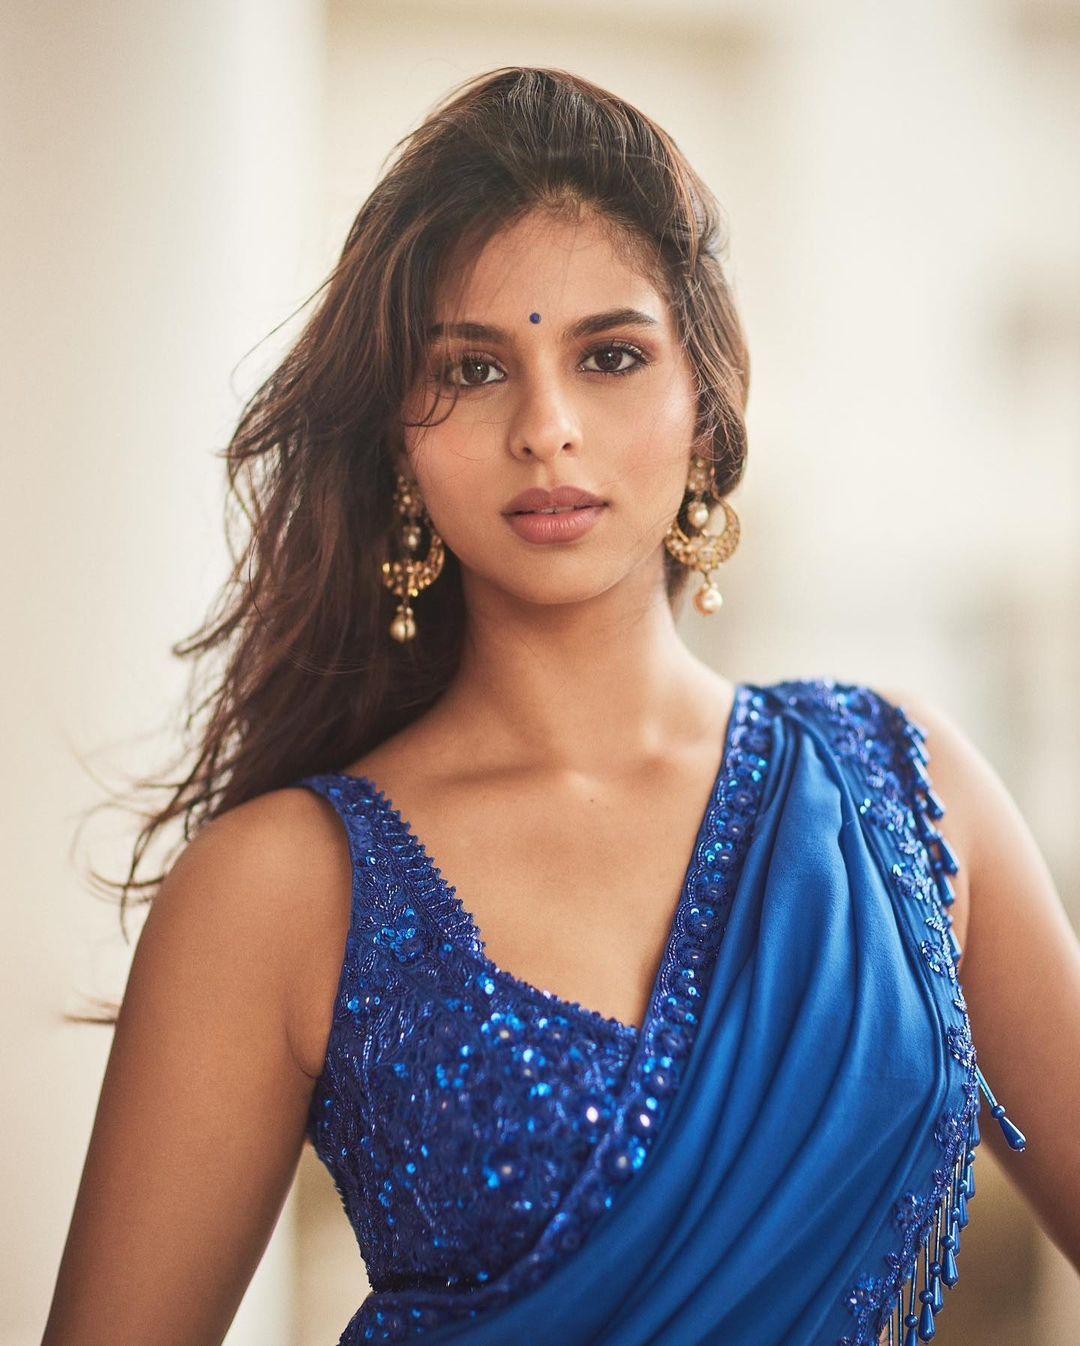 Suhana's decision to opt for minimal jewellery further emphasized the elegance of her ensemble. The bindi on her forehead added a traditional touch to her overall look